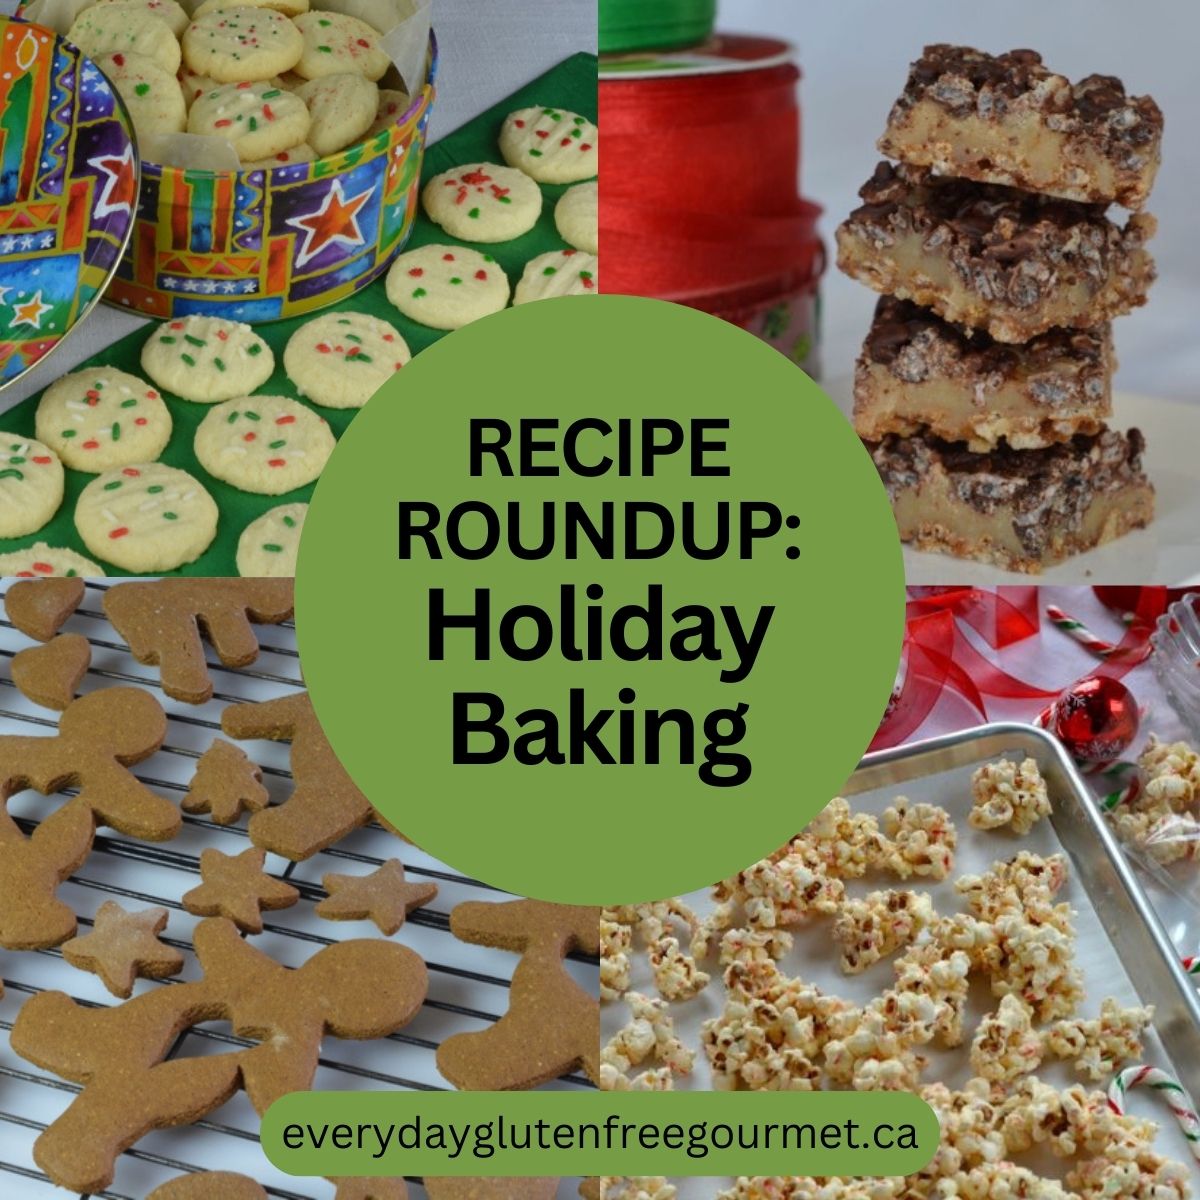 Four gluten free holiday recipes; shortbread cookies, toffee squares, gingerbread and white chocolate candy cane popcorn.